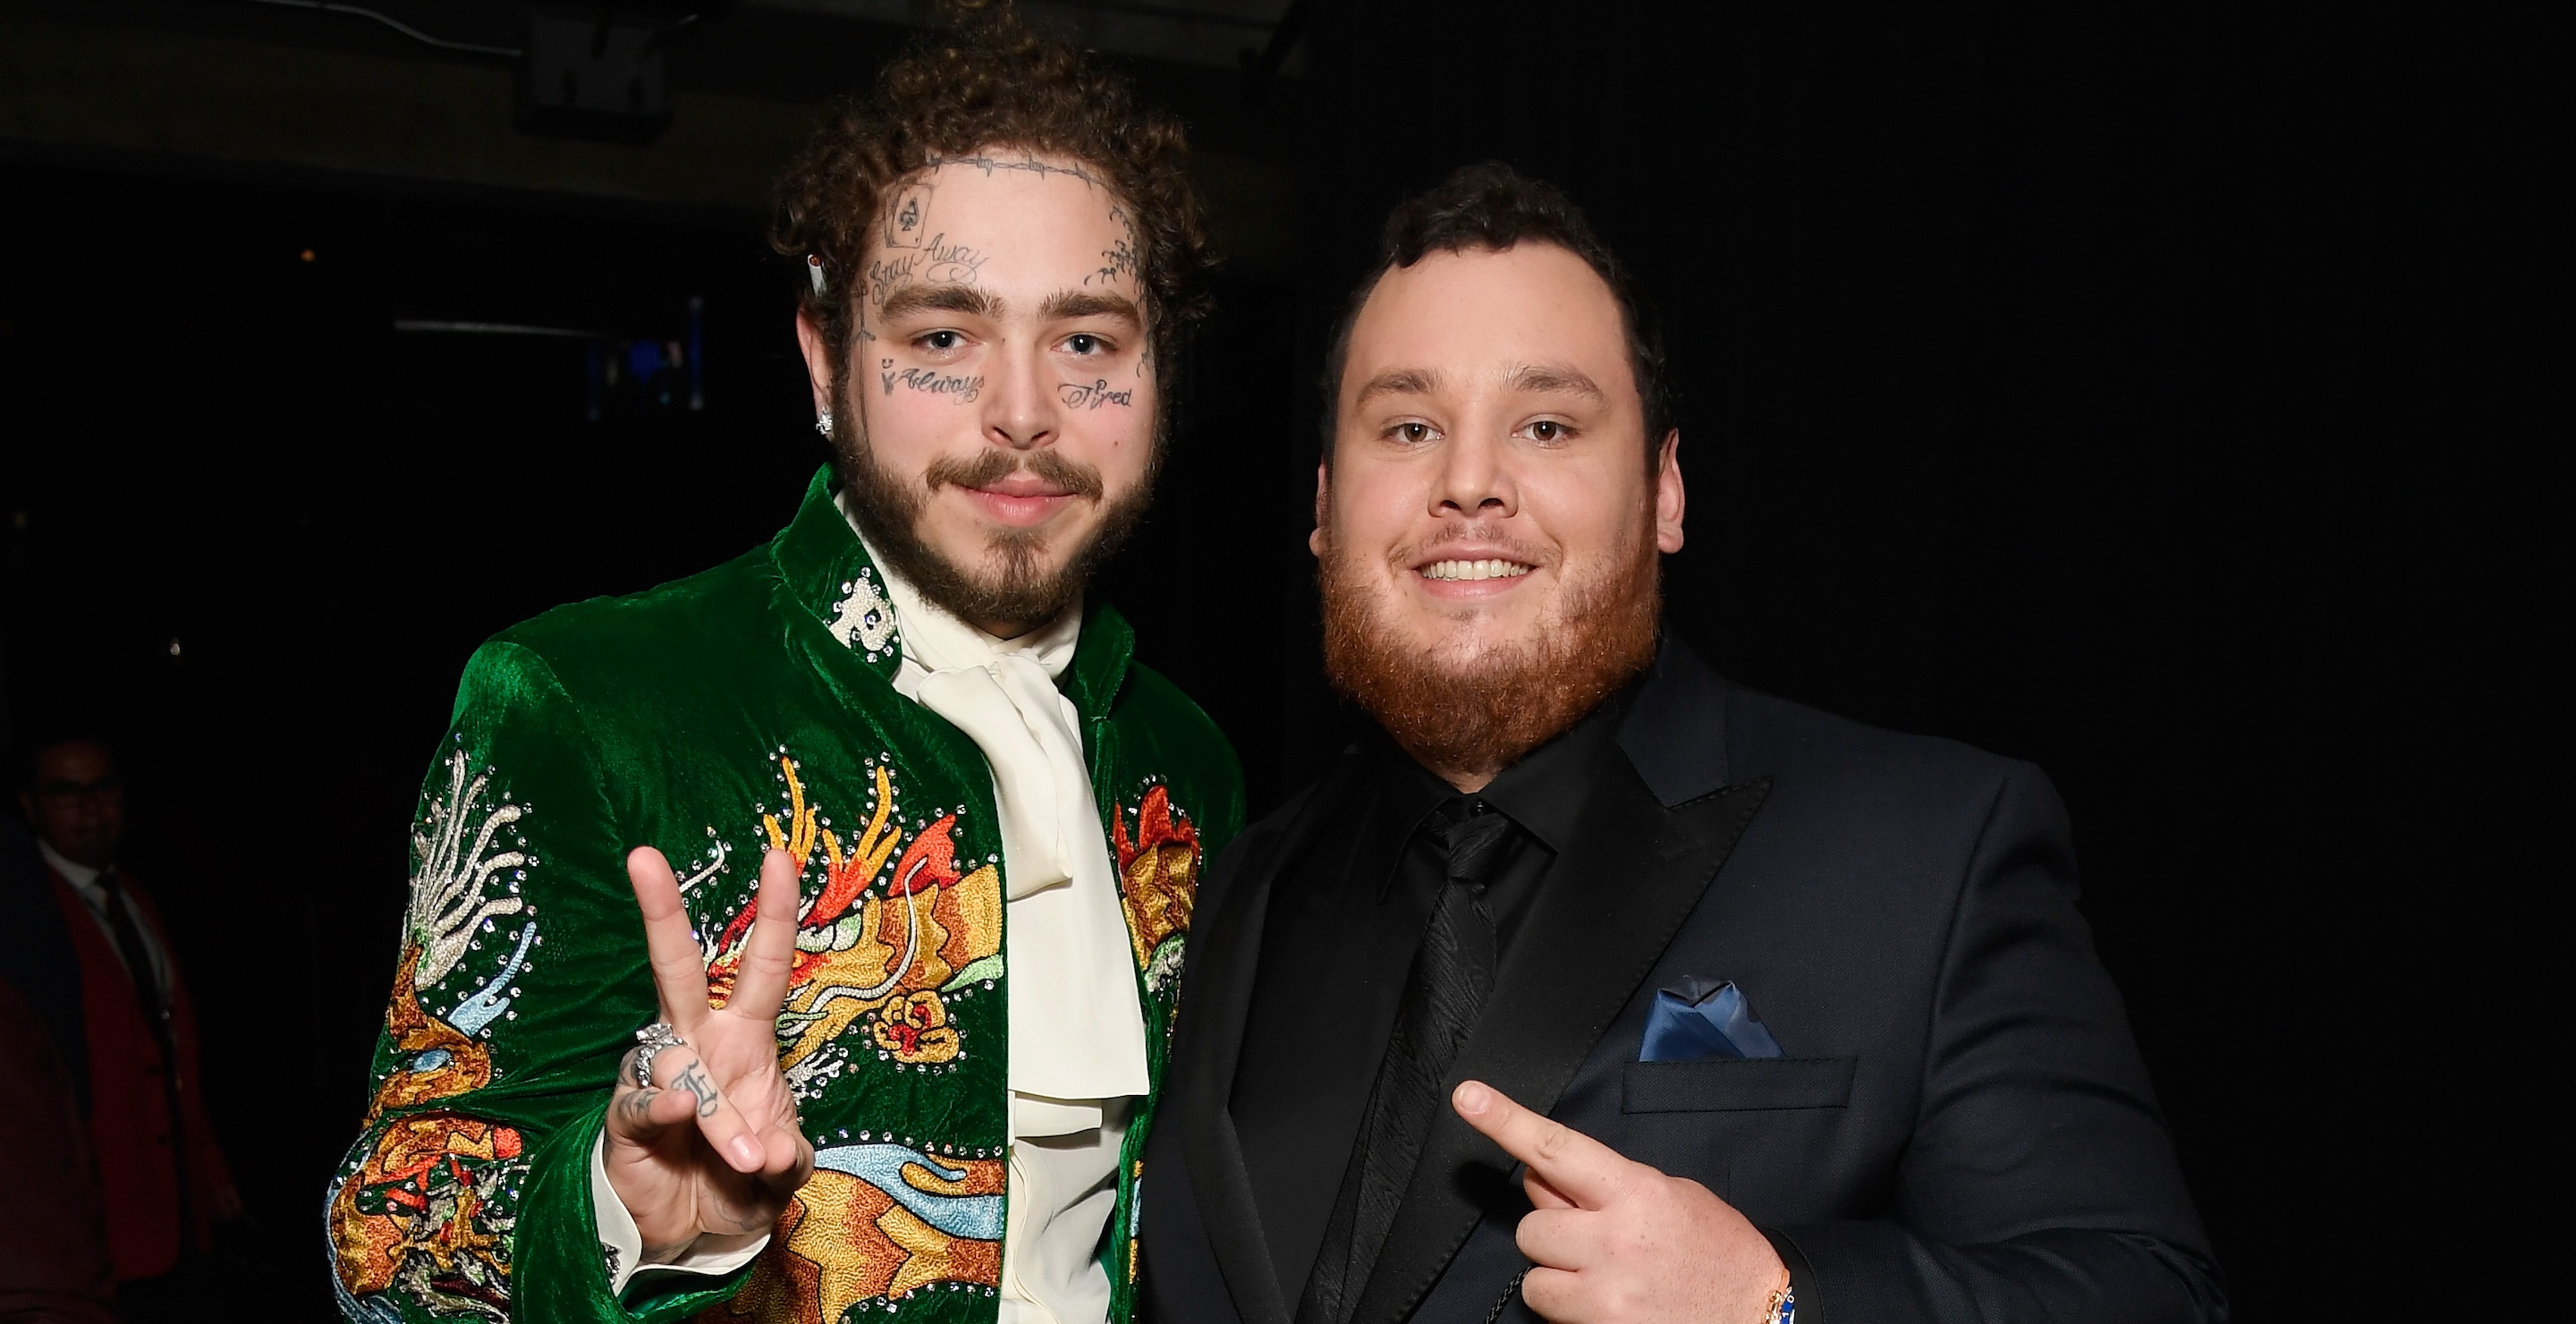 LOS ANGELES, CA - FEBRUARY 10: Post Malone (L) and Luke Combs backstage during the 61st Annual GRAMMY Awards at Staples Center on February 10, 2019 in Los Angeles, California.